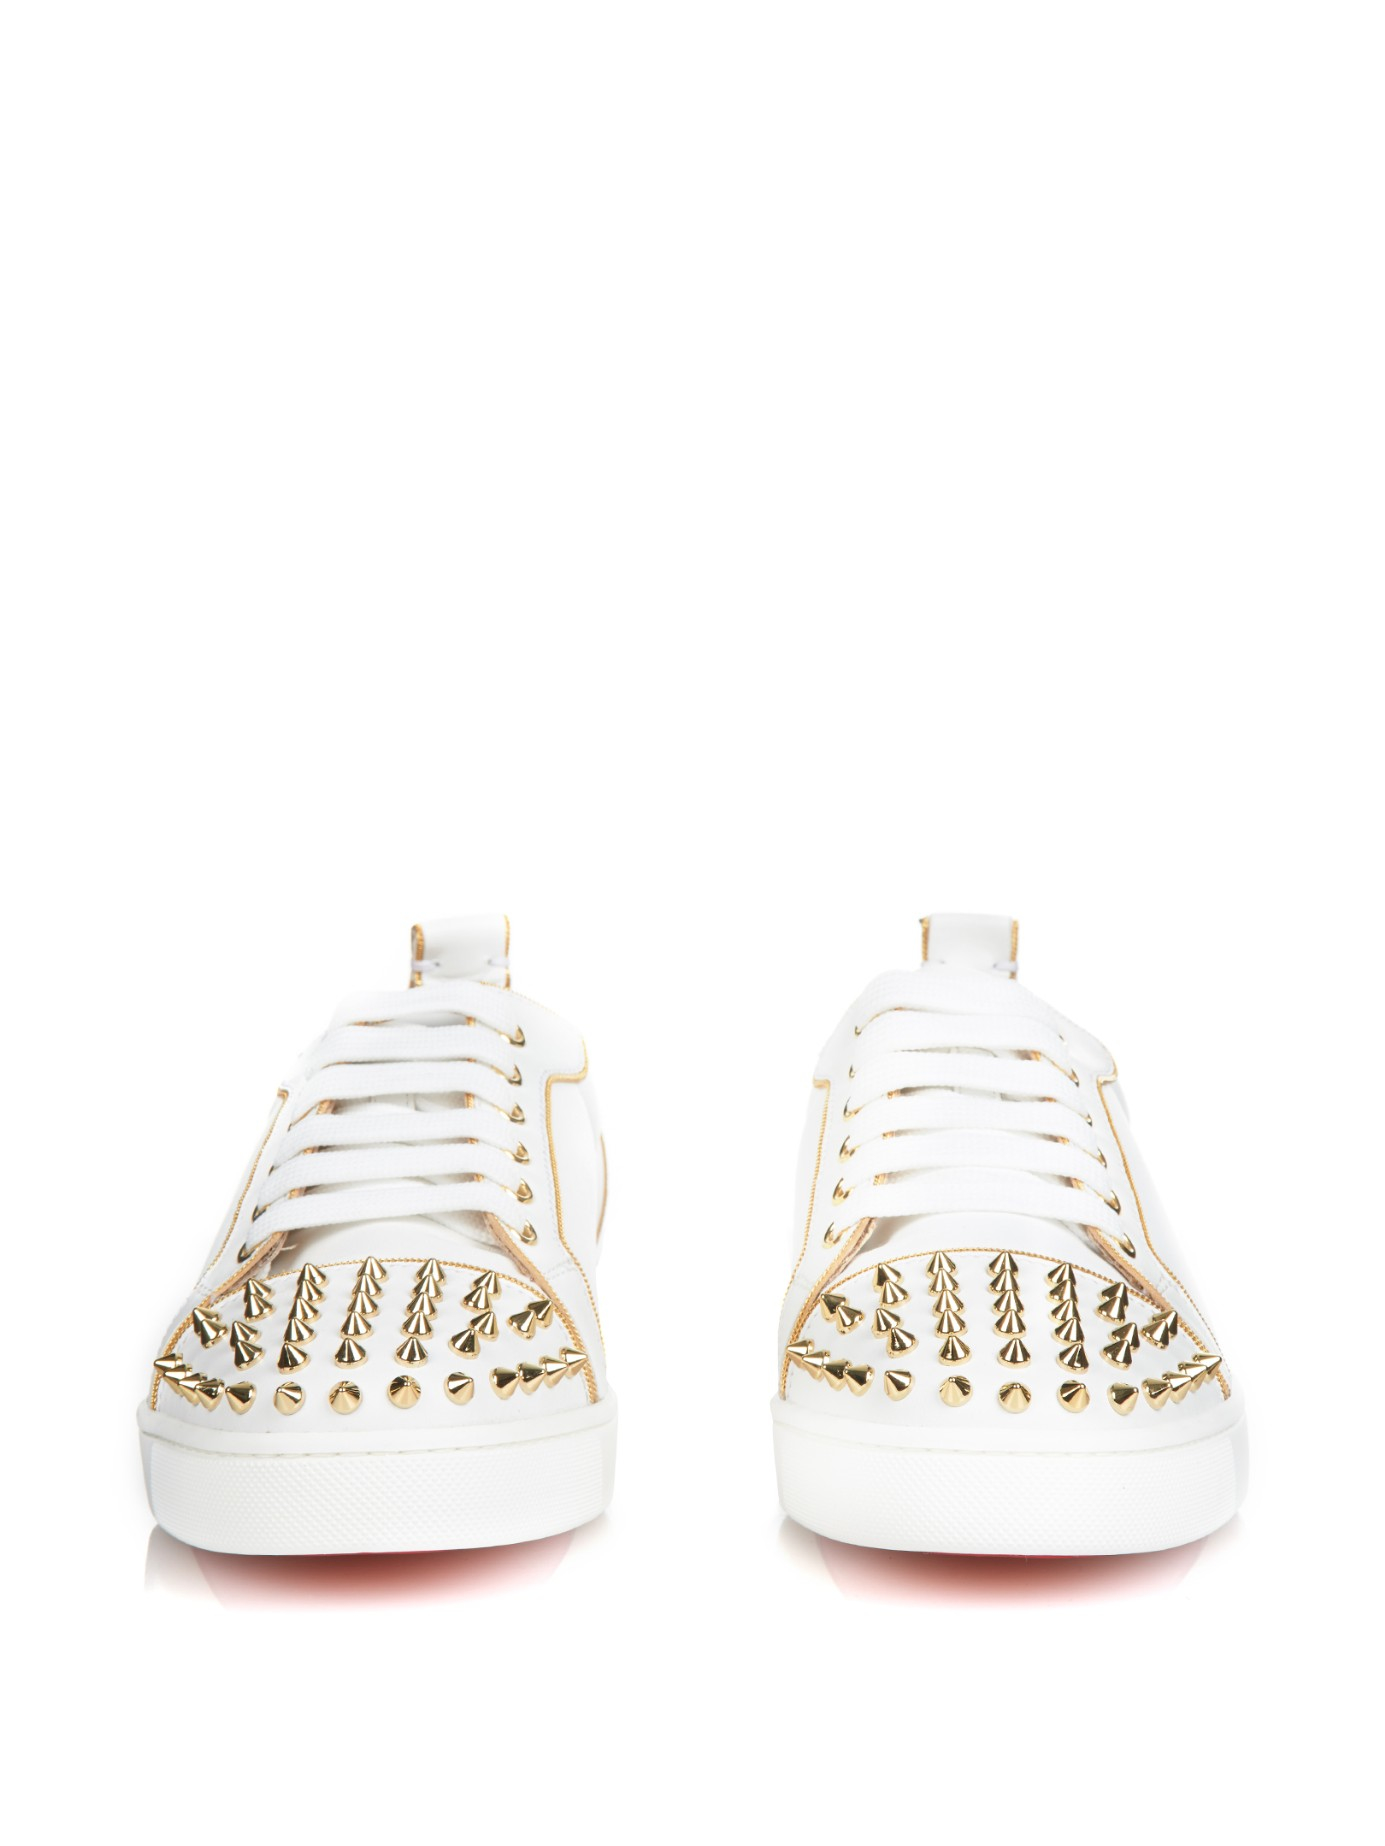 christian louboutin studded patent leather skate sneakers, Keyword